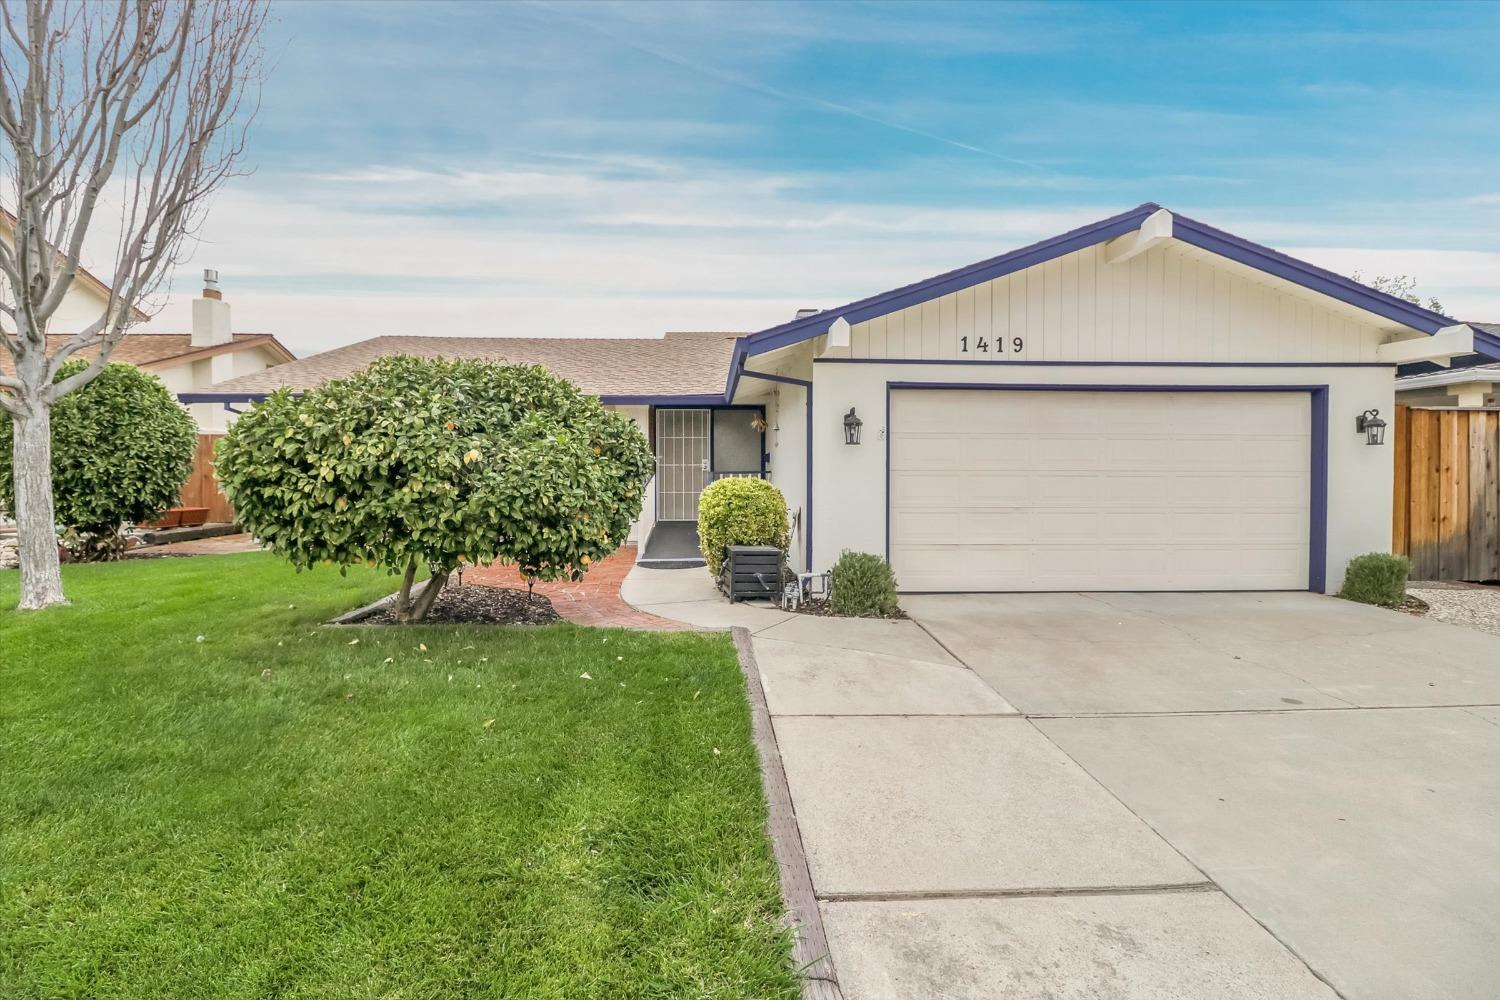 Photo of 1419 Roselli Dr in Livermore, CA